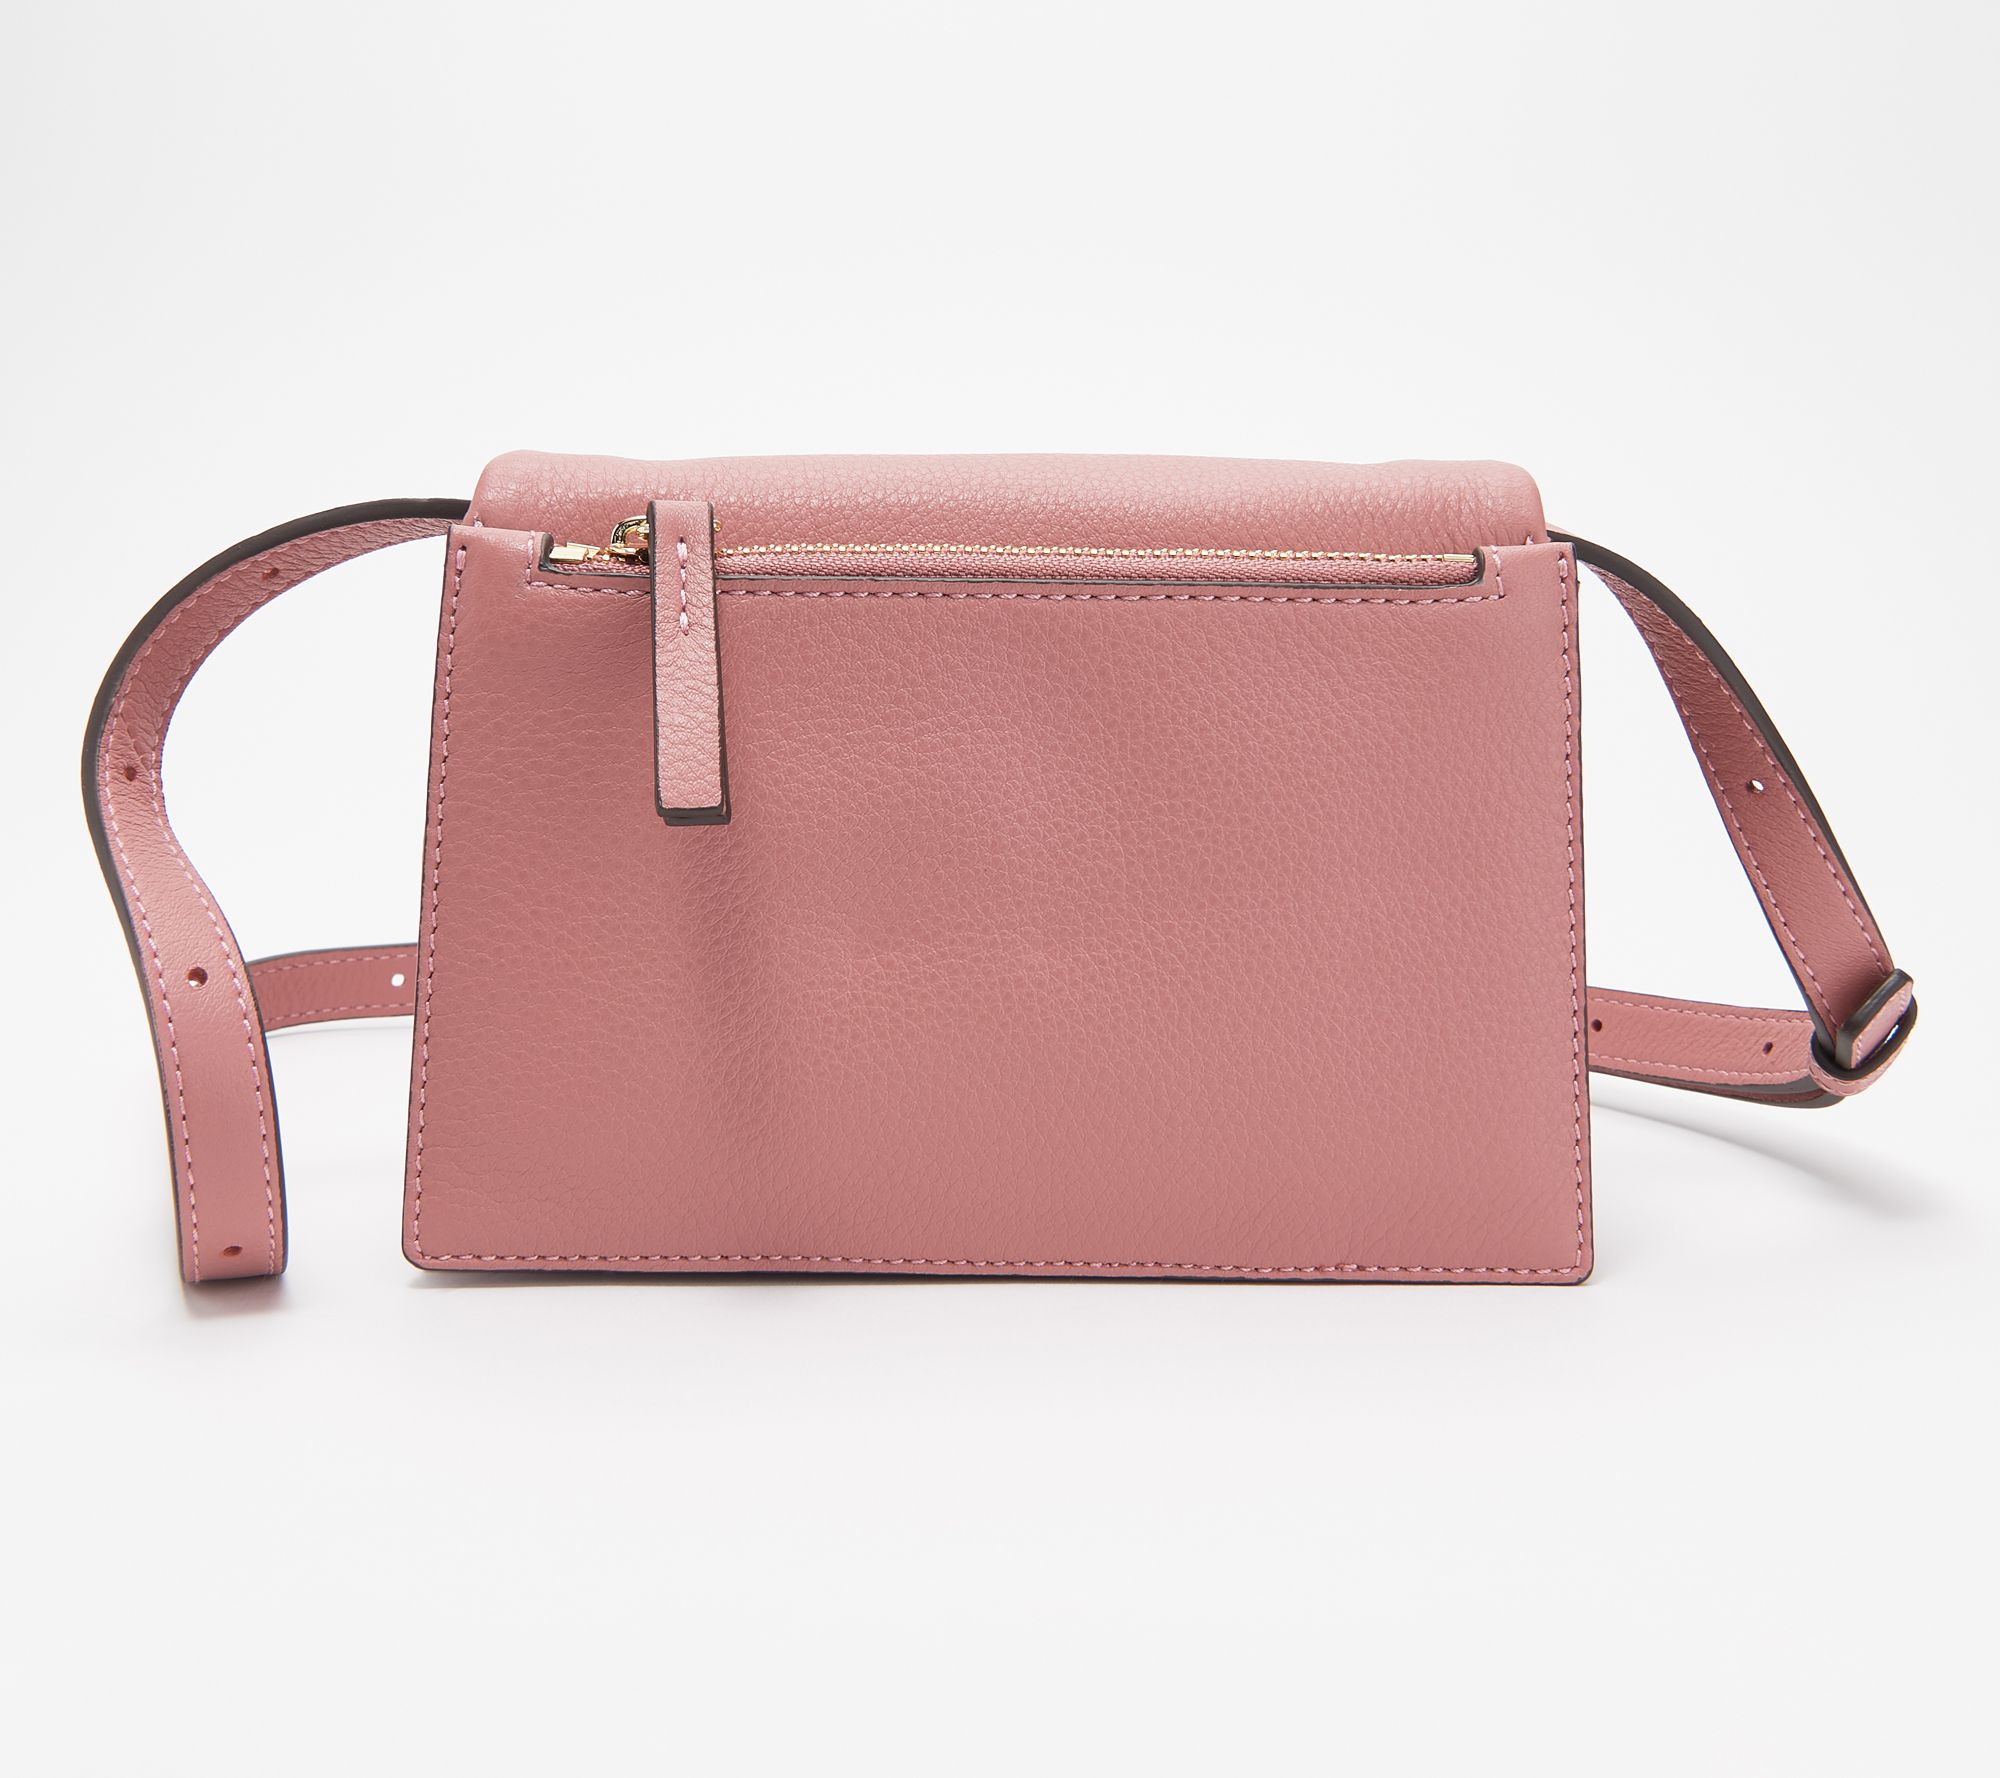 Crossbody By Vince Camuto Size: Small, 55% OFF